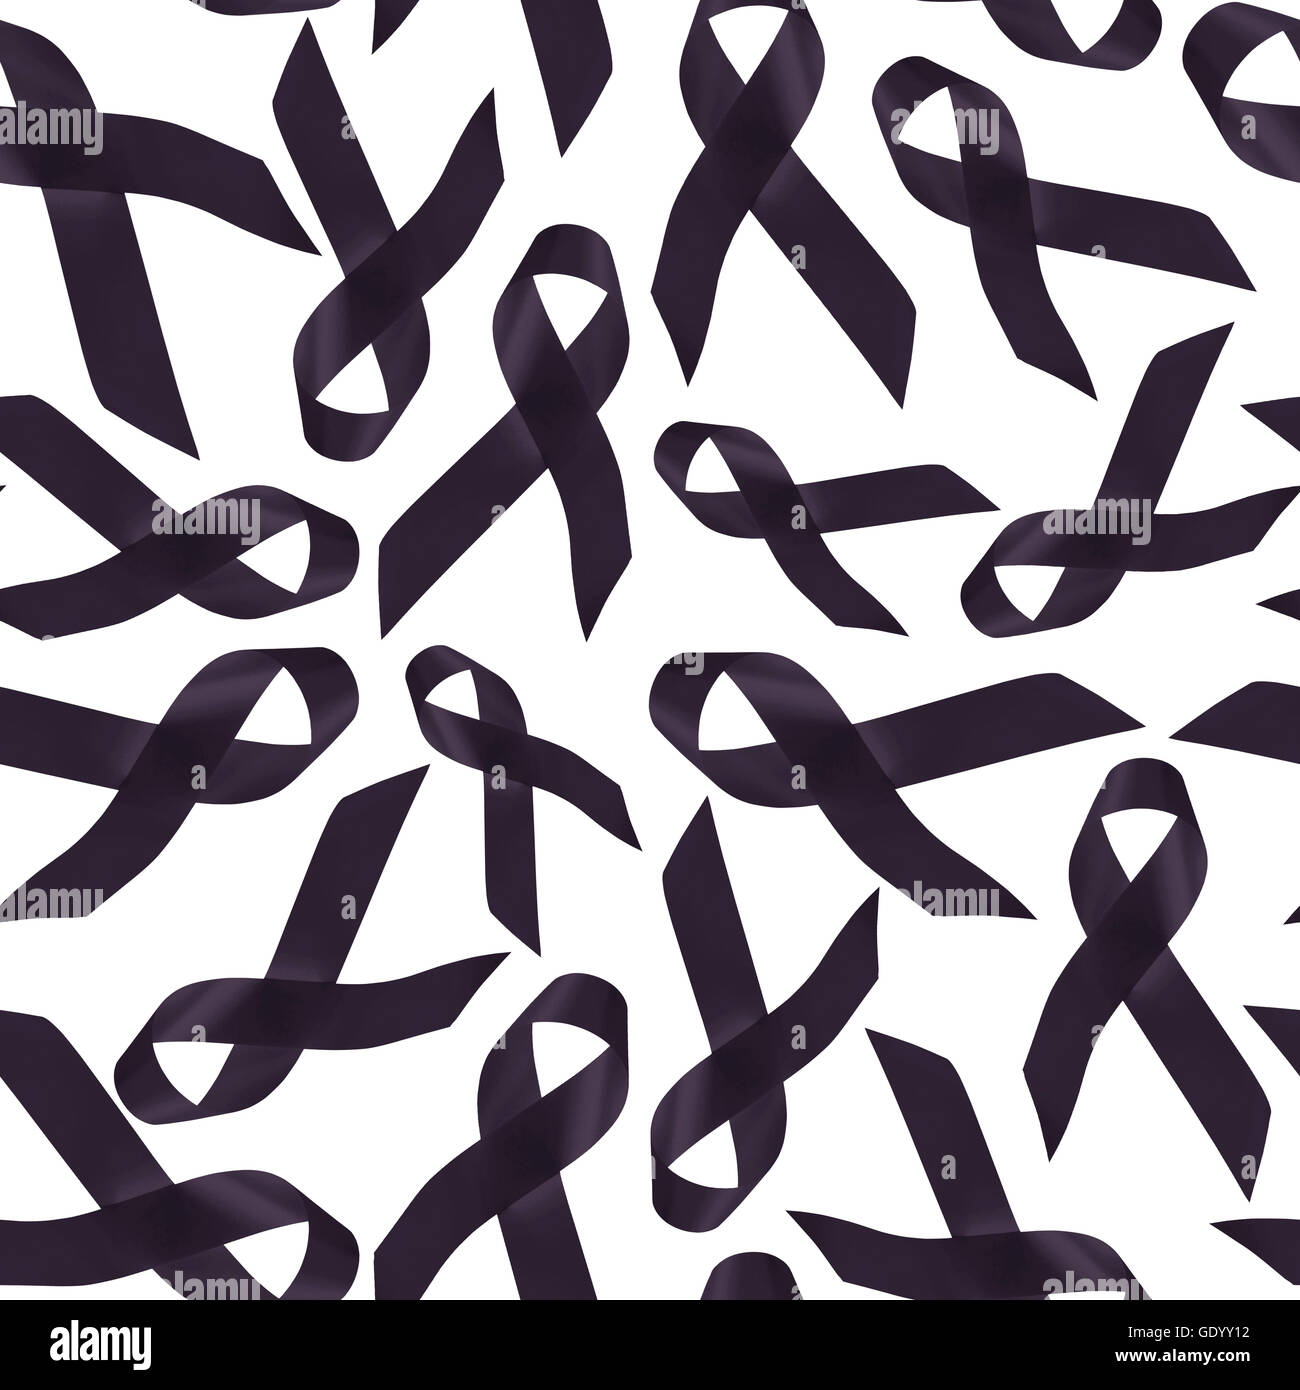 Melanoma cancer awareness background, seamless pattern made of black ribbons for support. Stock Photo